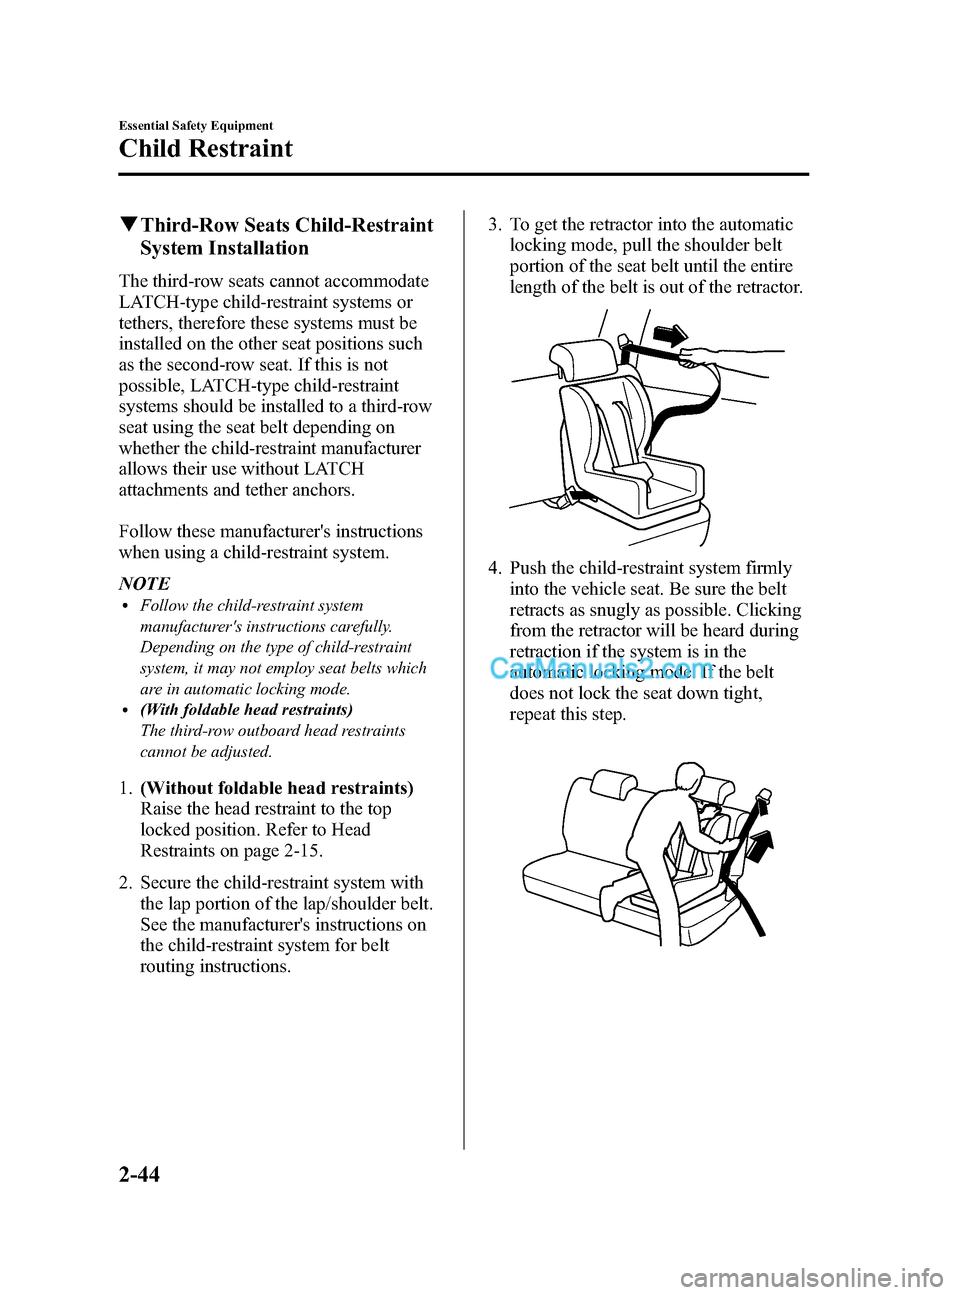 MAZDA MODEL CX-9 2014  Owners Manual (in English) Black plate (56,1)
qThird-Row Seats Child-Restraint
System Installation
The third-row seats cannot accommodate
LATCH-type child-restraint systems or
tethers, therefore these systems must be
installed 